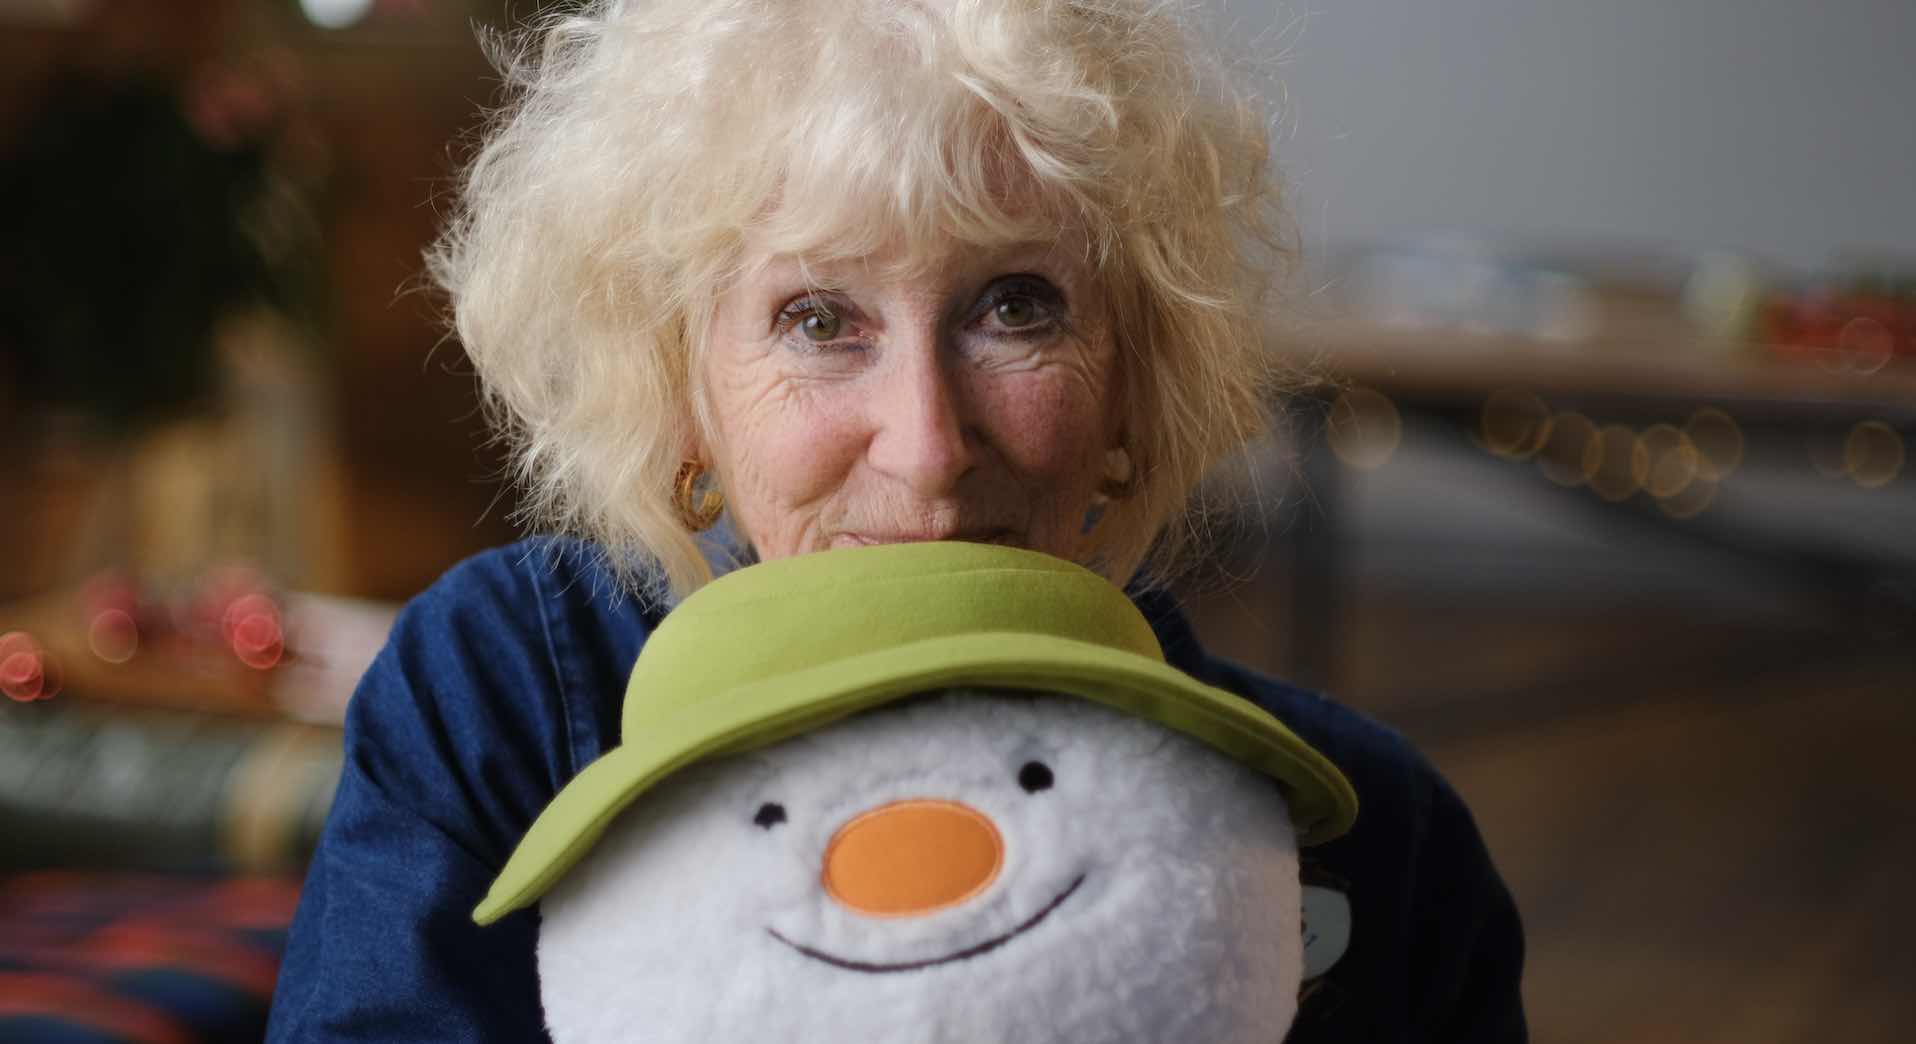 C4 commemorates 40 years of The Snowman